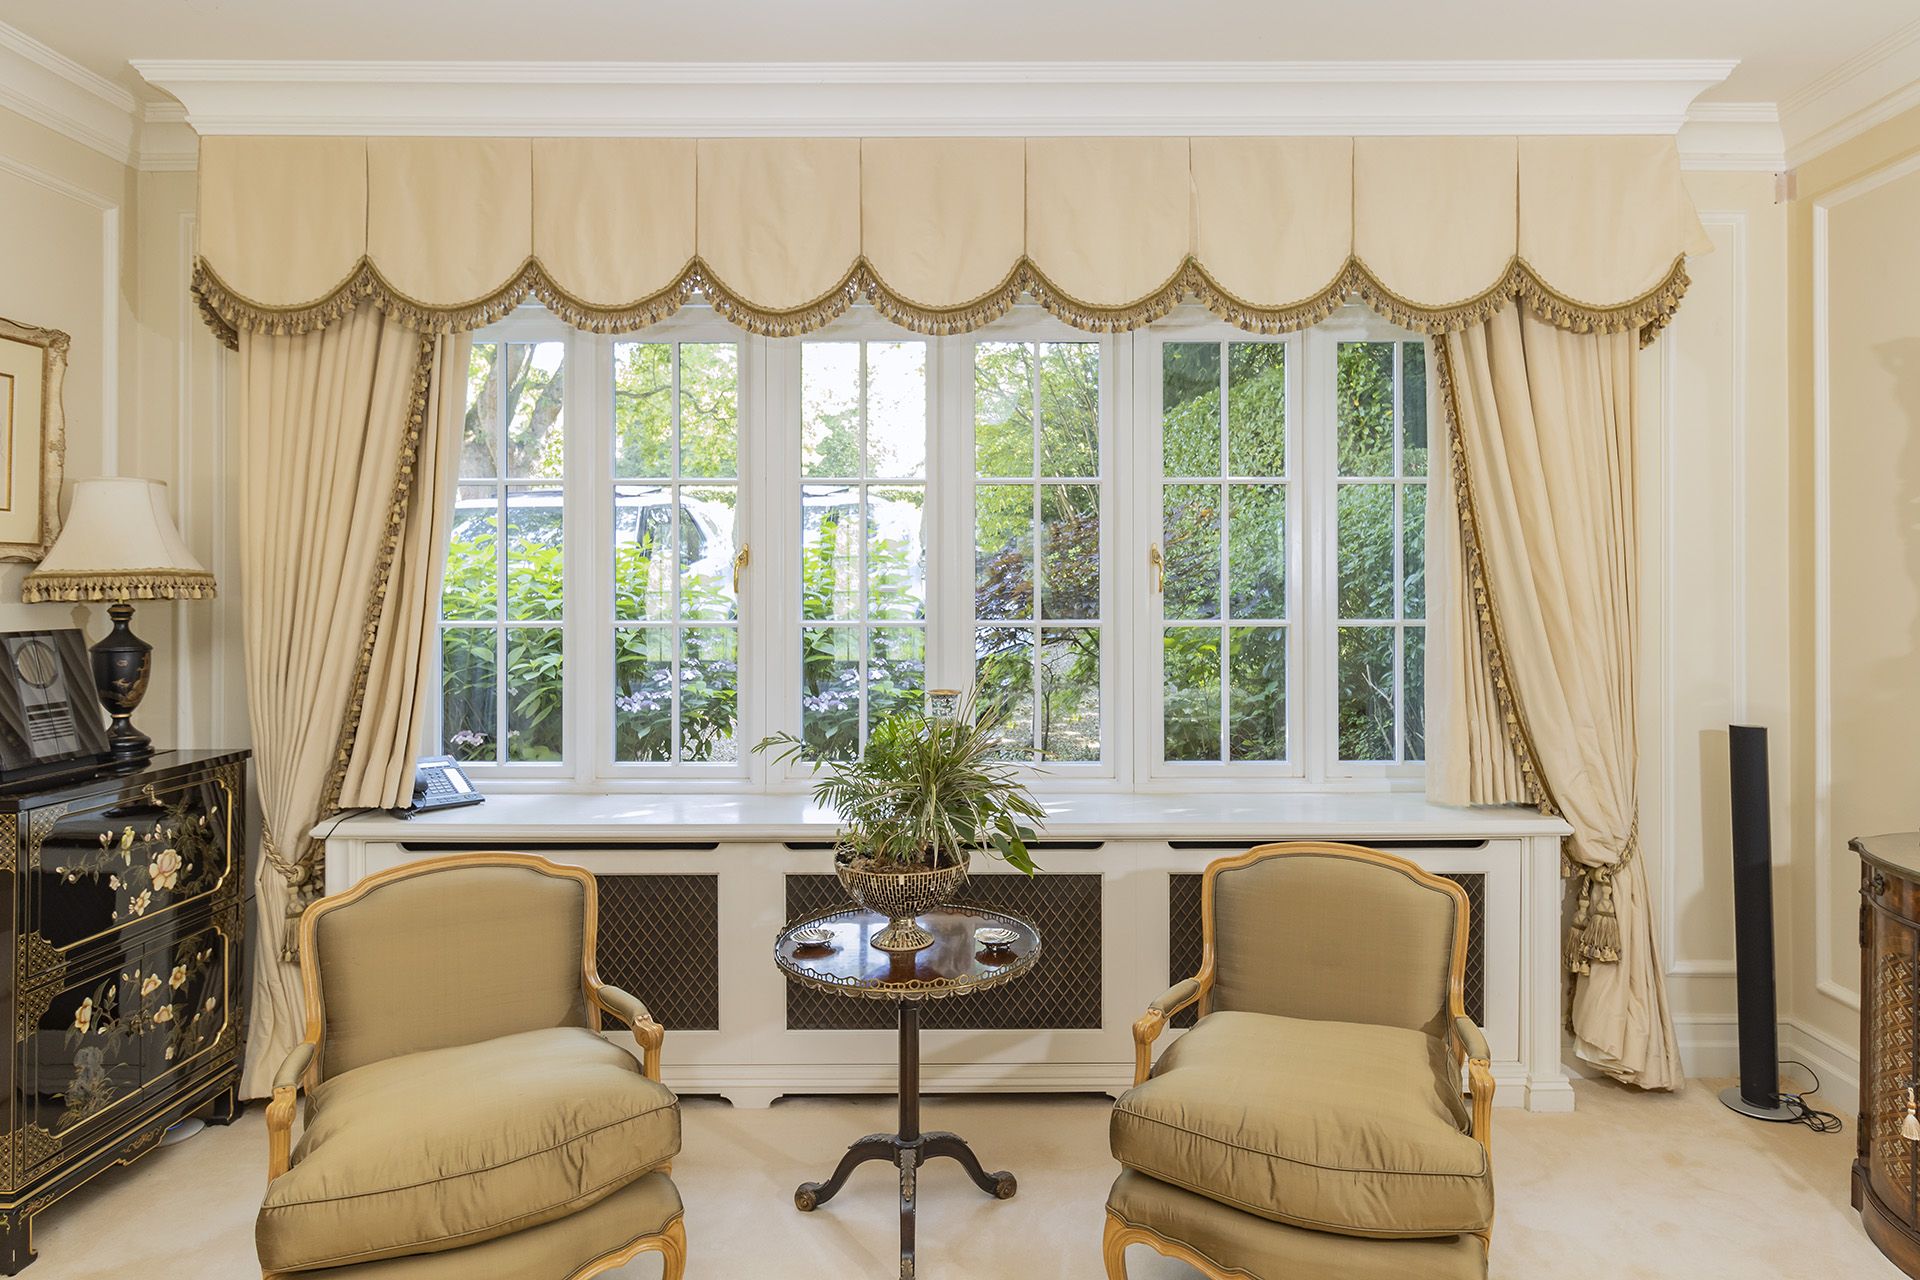 Silk cream drapes with pelmet and swags spans an area of 5m french door and windows - Image 3 of 9